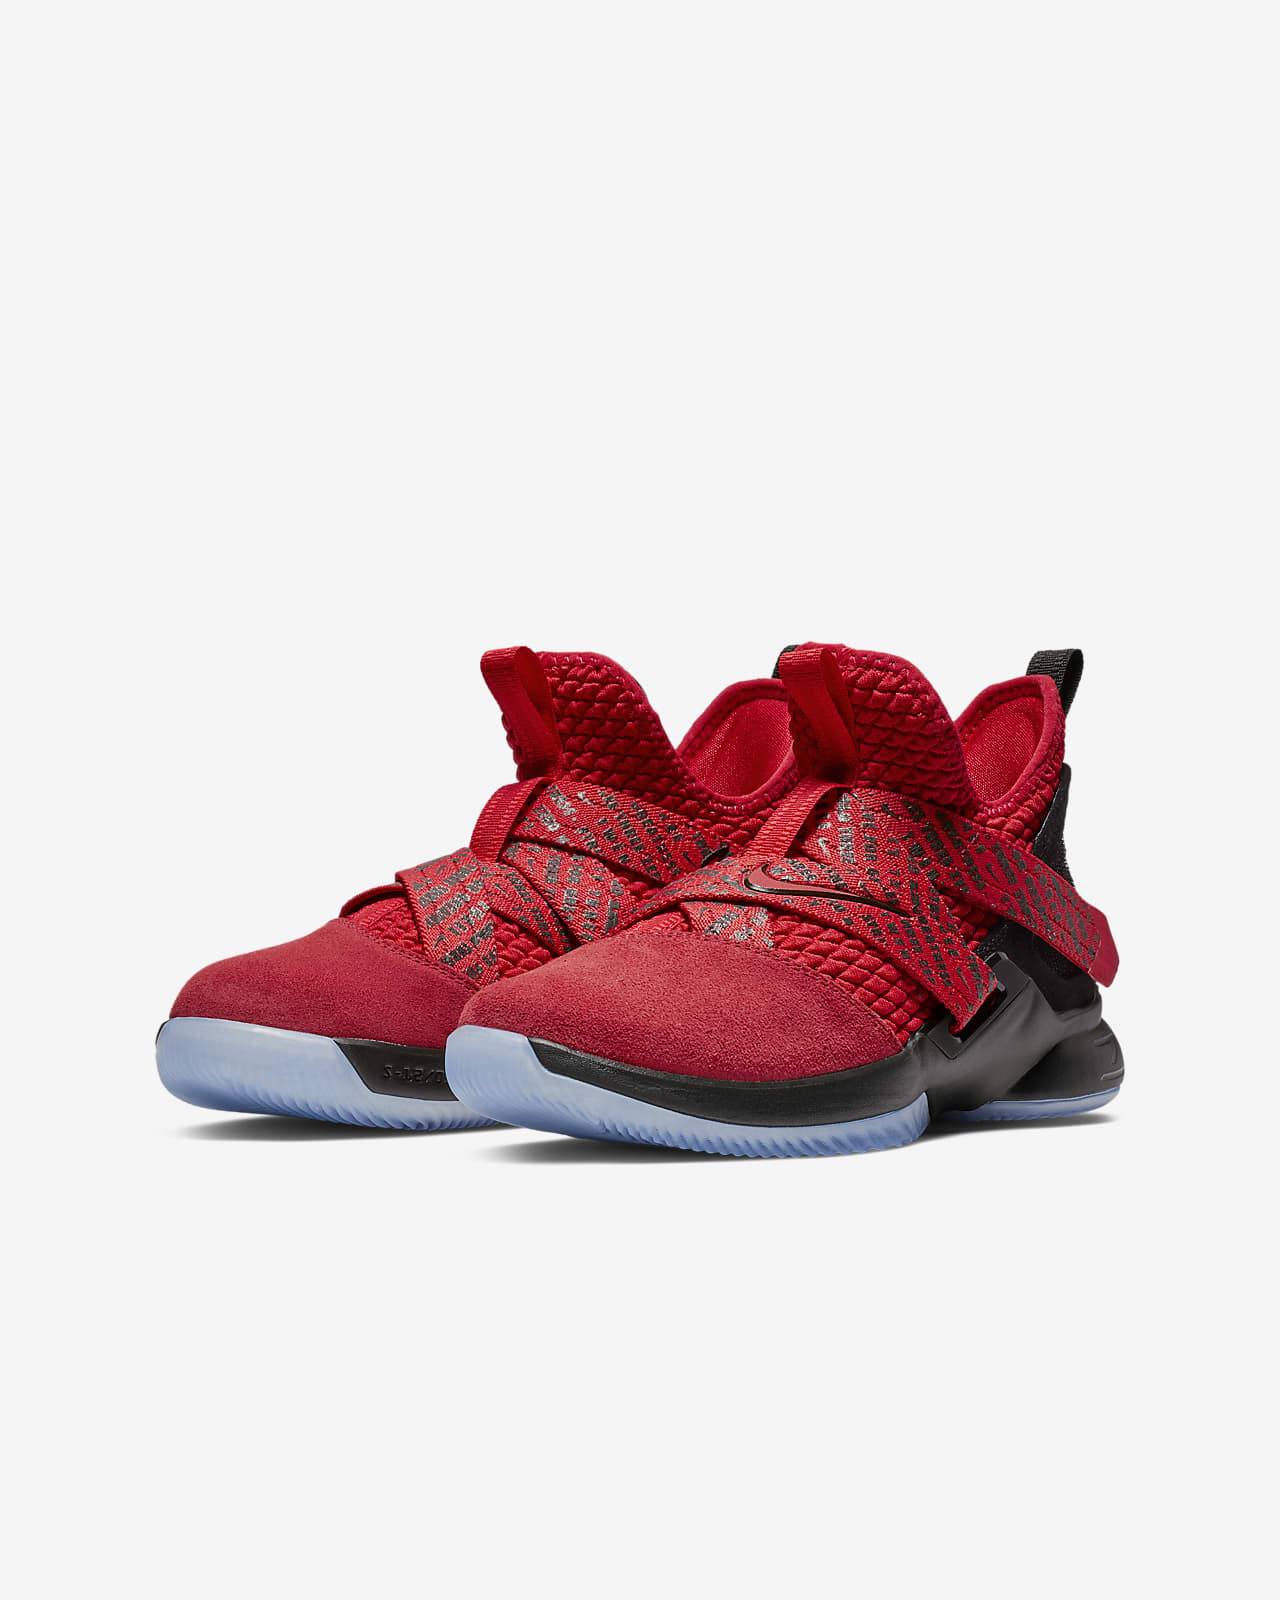 nike lebron soldier xii shoes